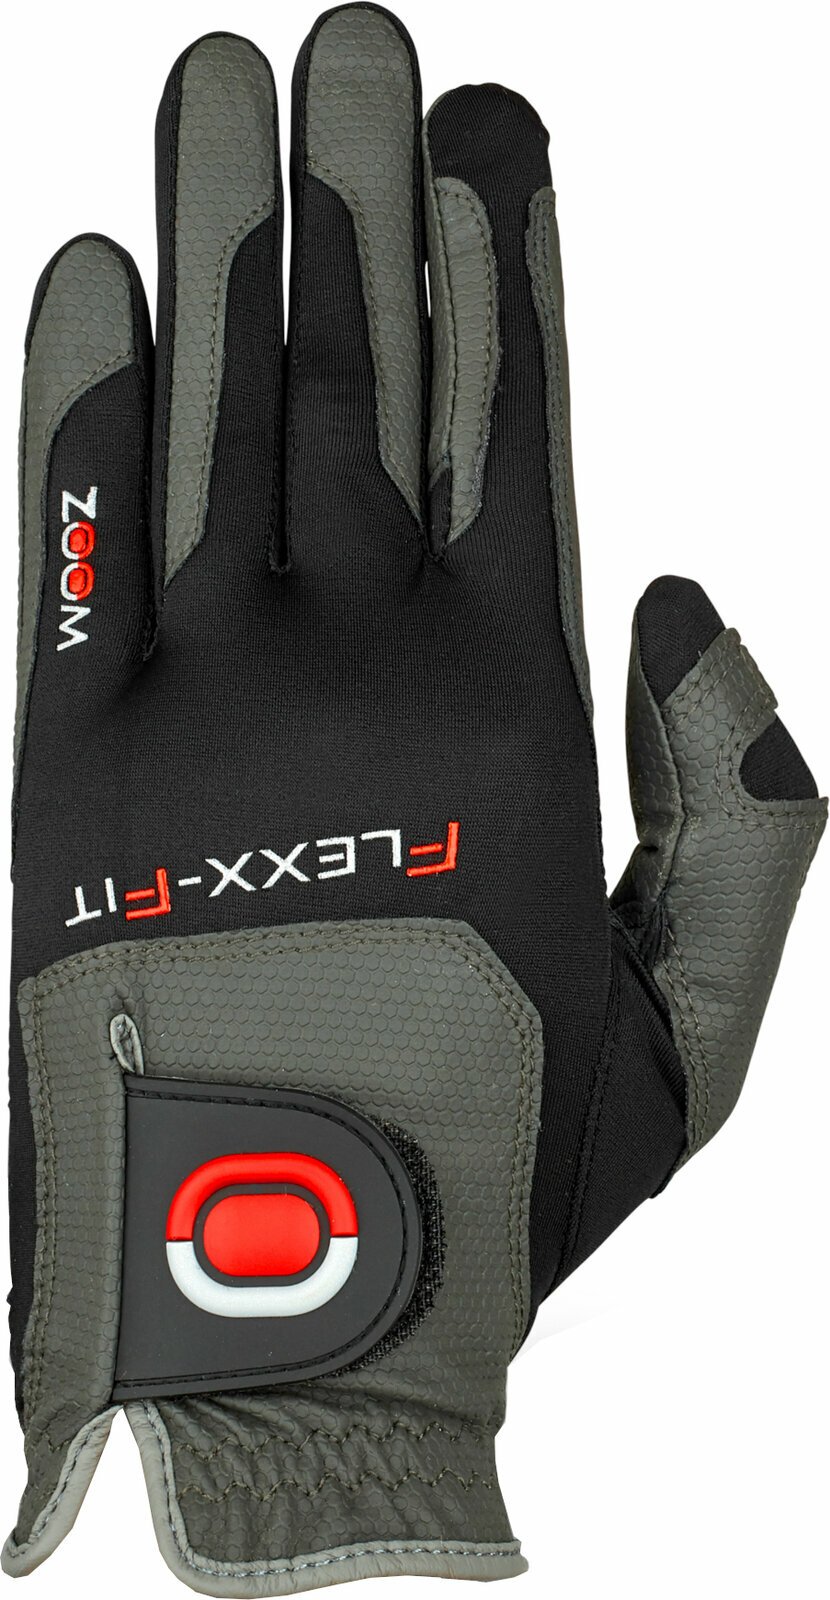 Rukavice Zoom Gloves Weather Womens Golf Glove Charcoal/Black/Red LH